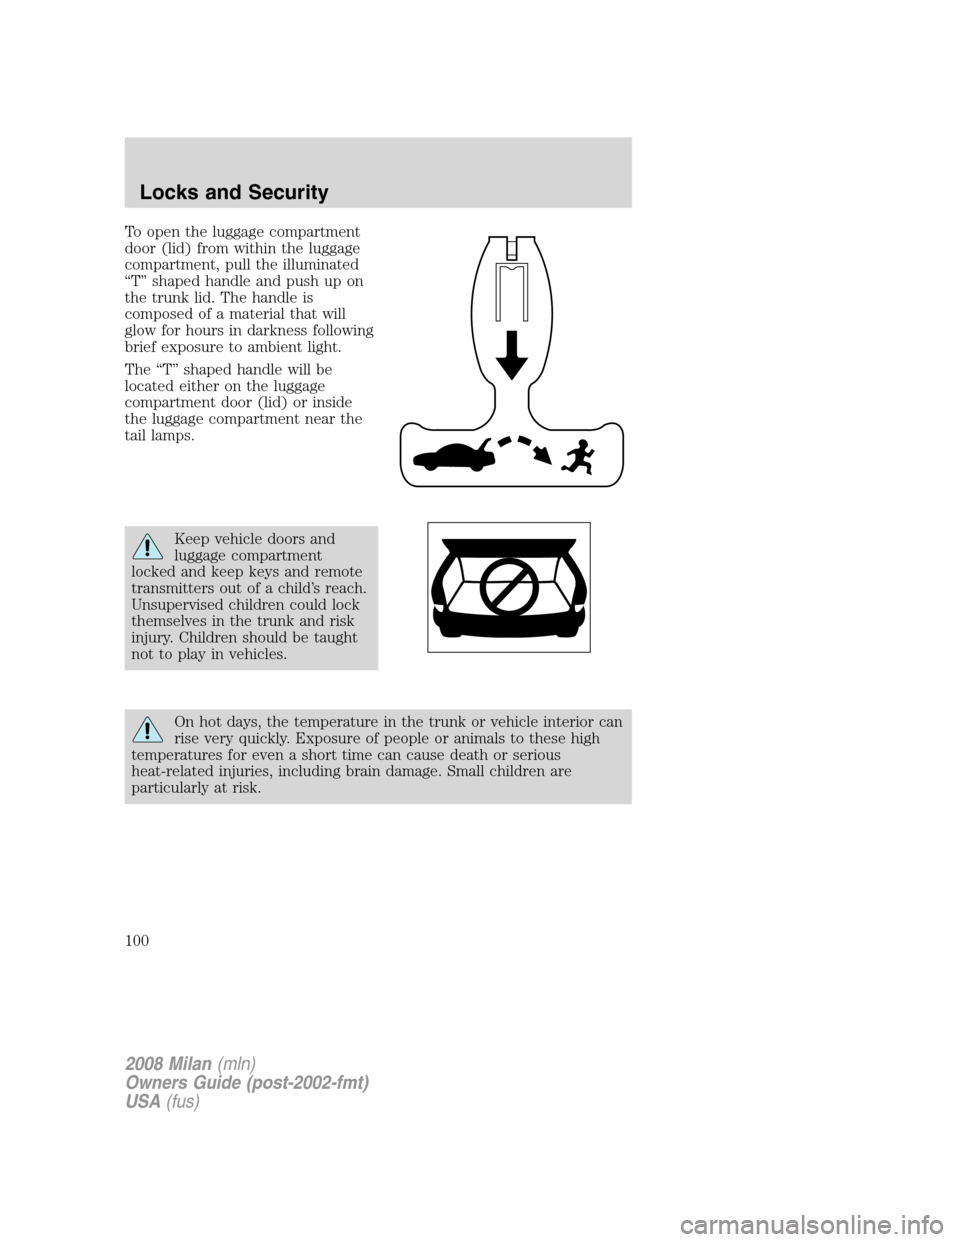 Mercury Milan 2008  Owners Manuals To open the luggage compartment
door (lid) from within the luggage
compartment, pull the illuminated
“T” shaped handle and push up on
the trunk lid. The handle is
composed of a material that will
